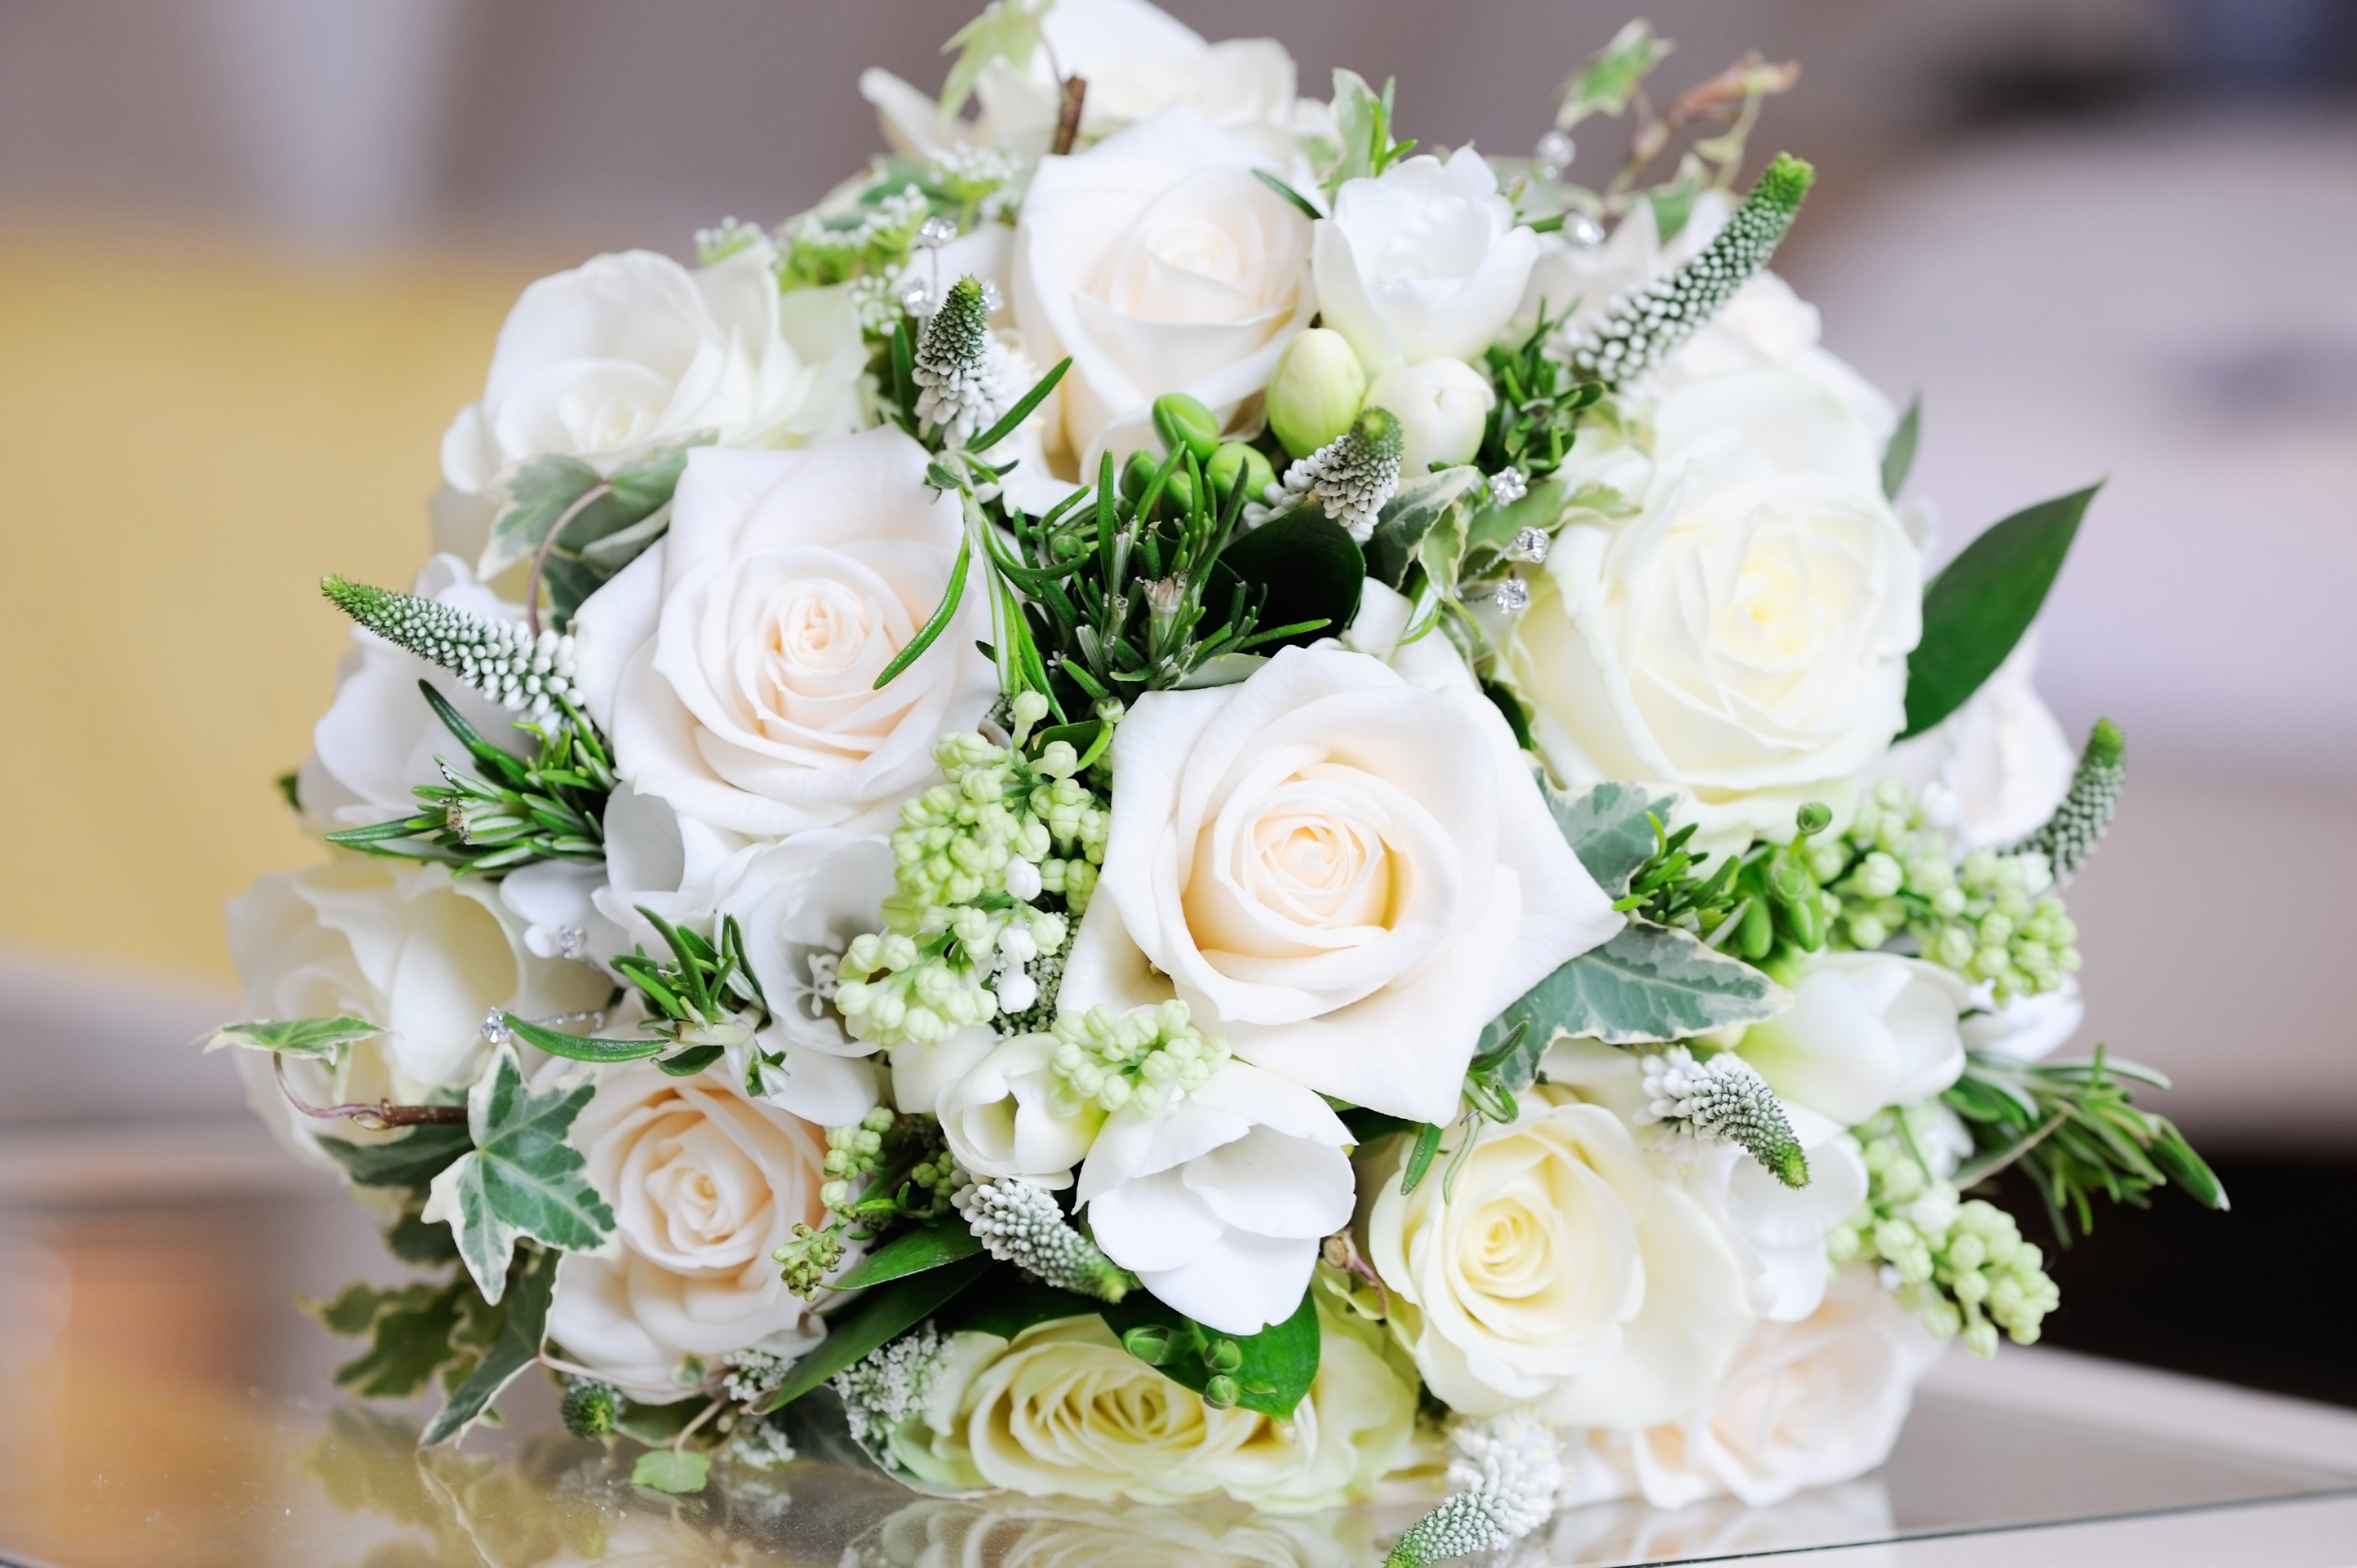 2017Nature___Flowers_Delicate_wedding_bouquet_of_white_roses_114224_.jpg